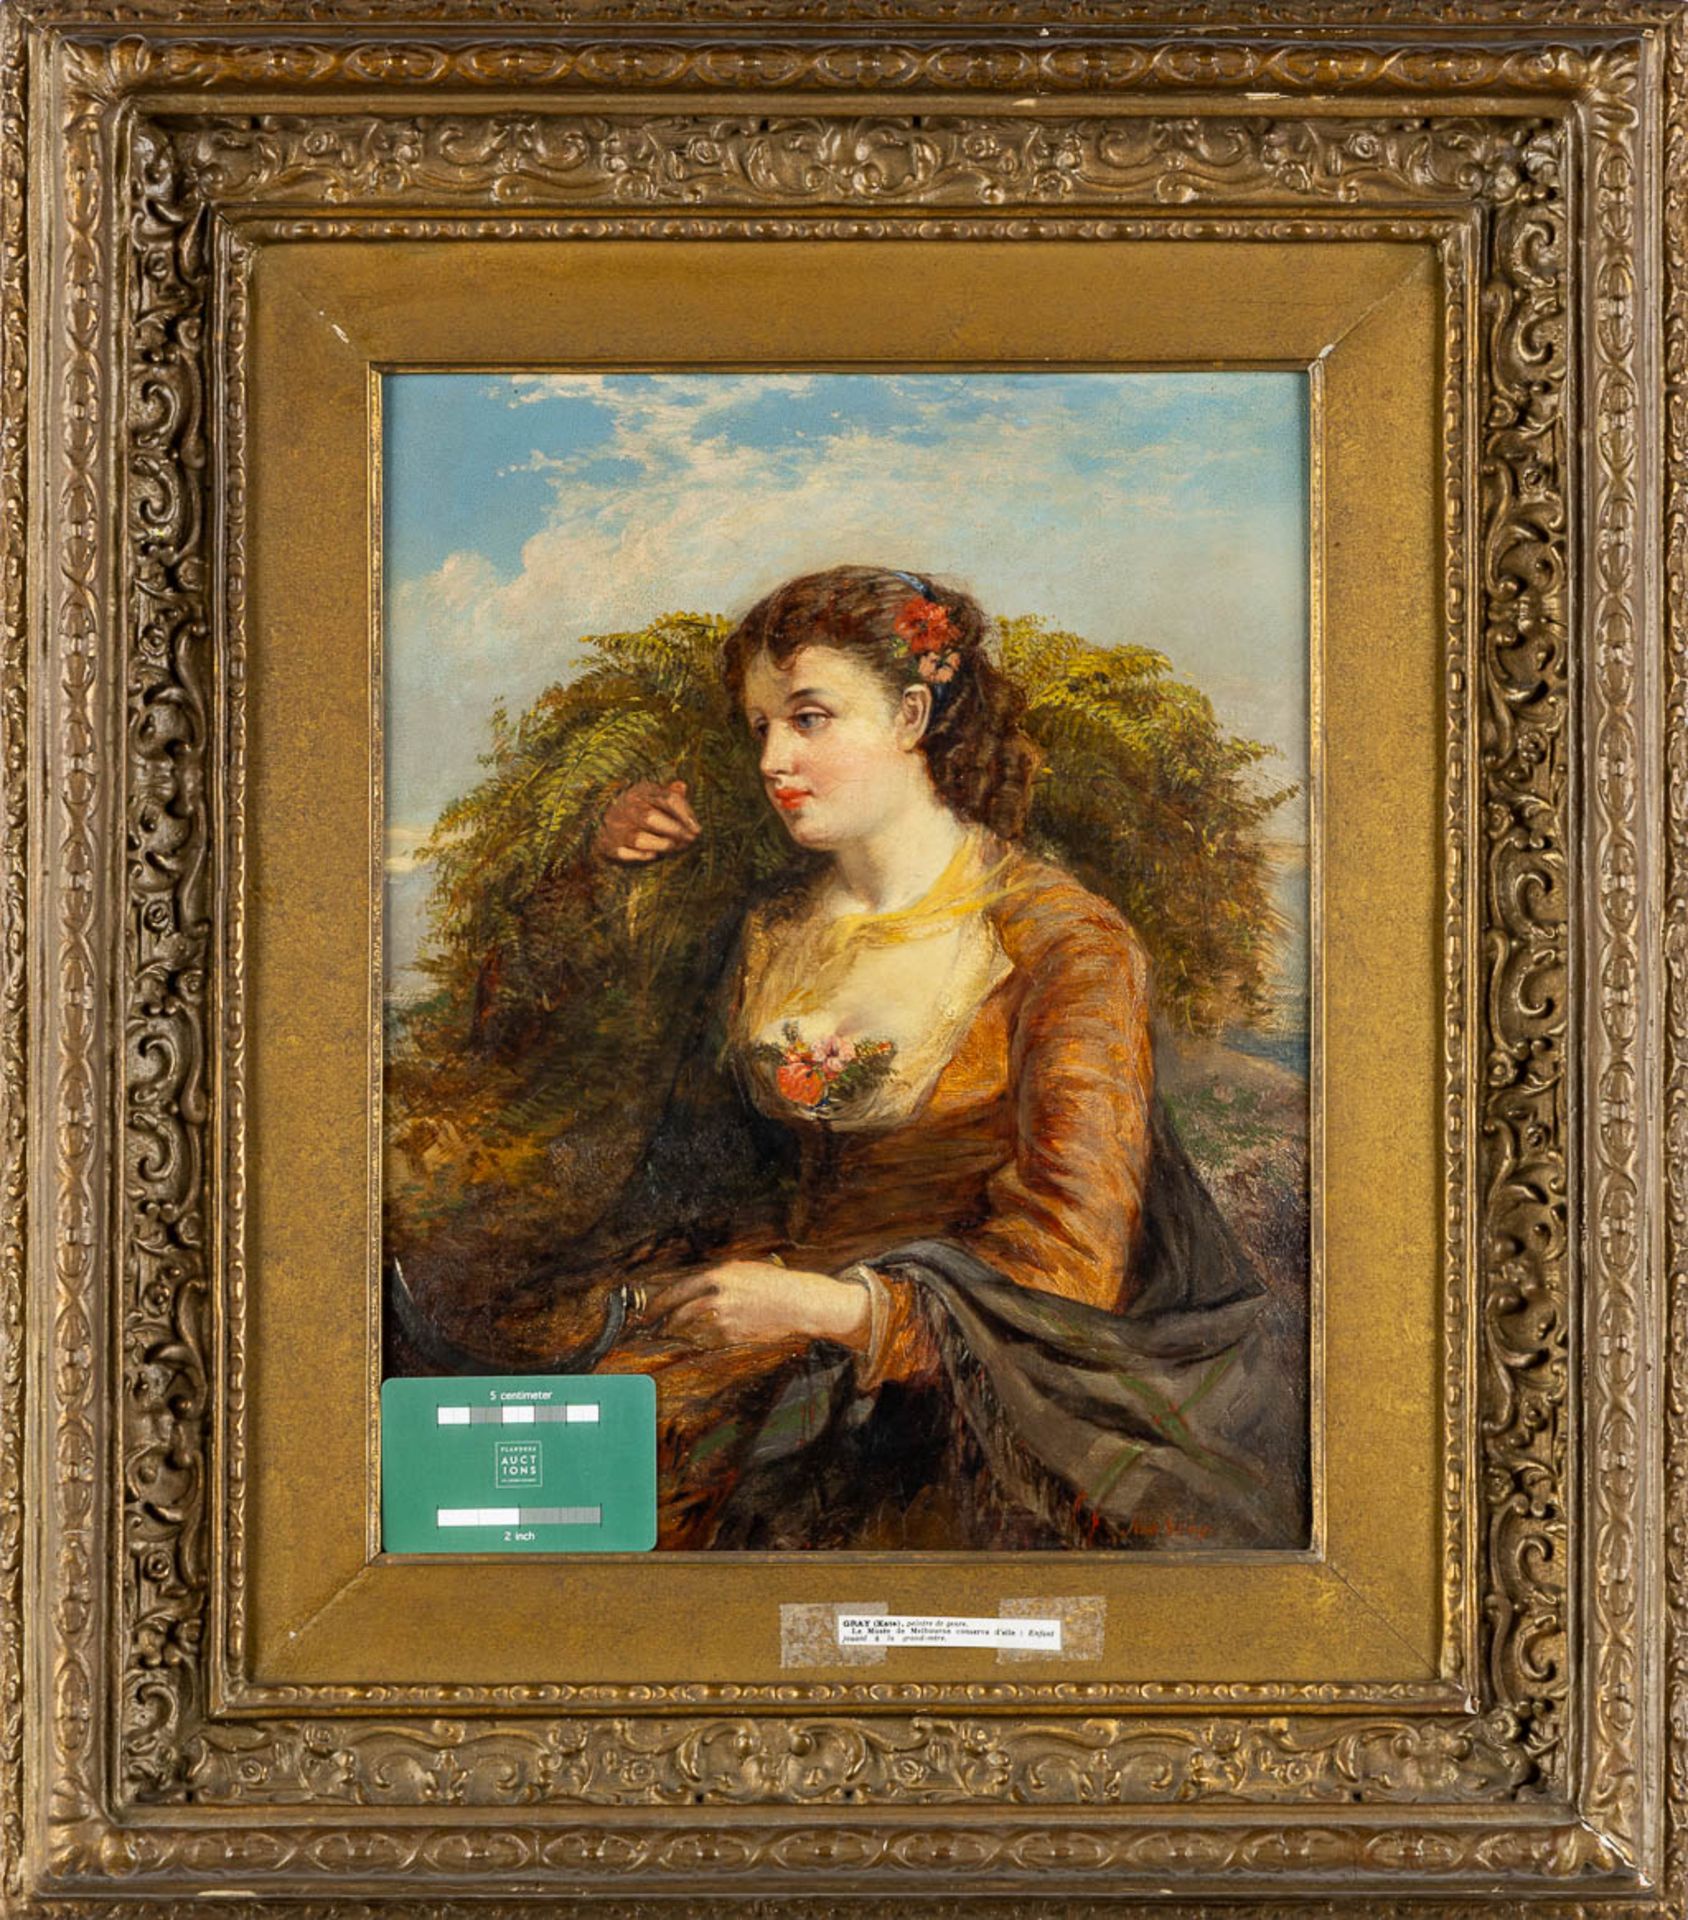 Kate GRAY (act.1848-1892) 'Portrait of a girl' oil on panel. (W:37,5 x H:45,5 cm) - Image 2 of 9